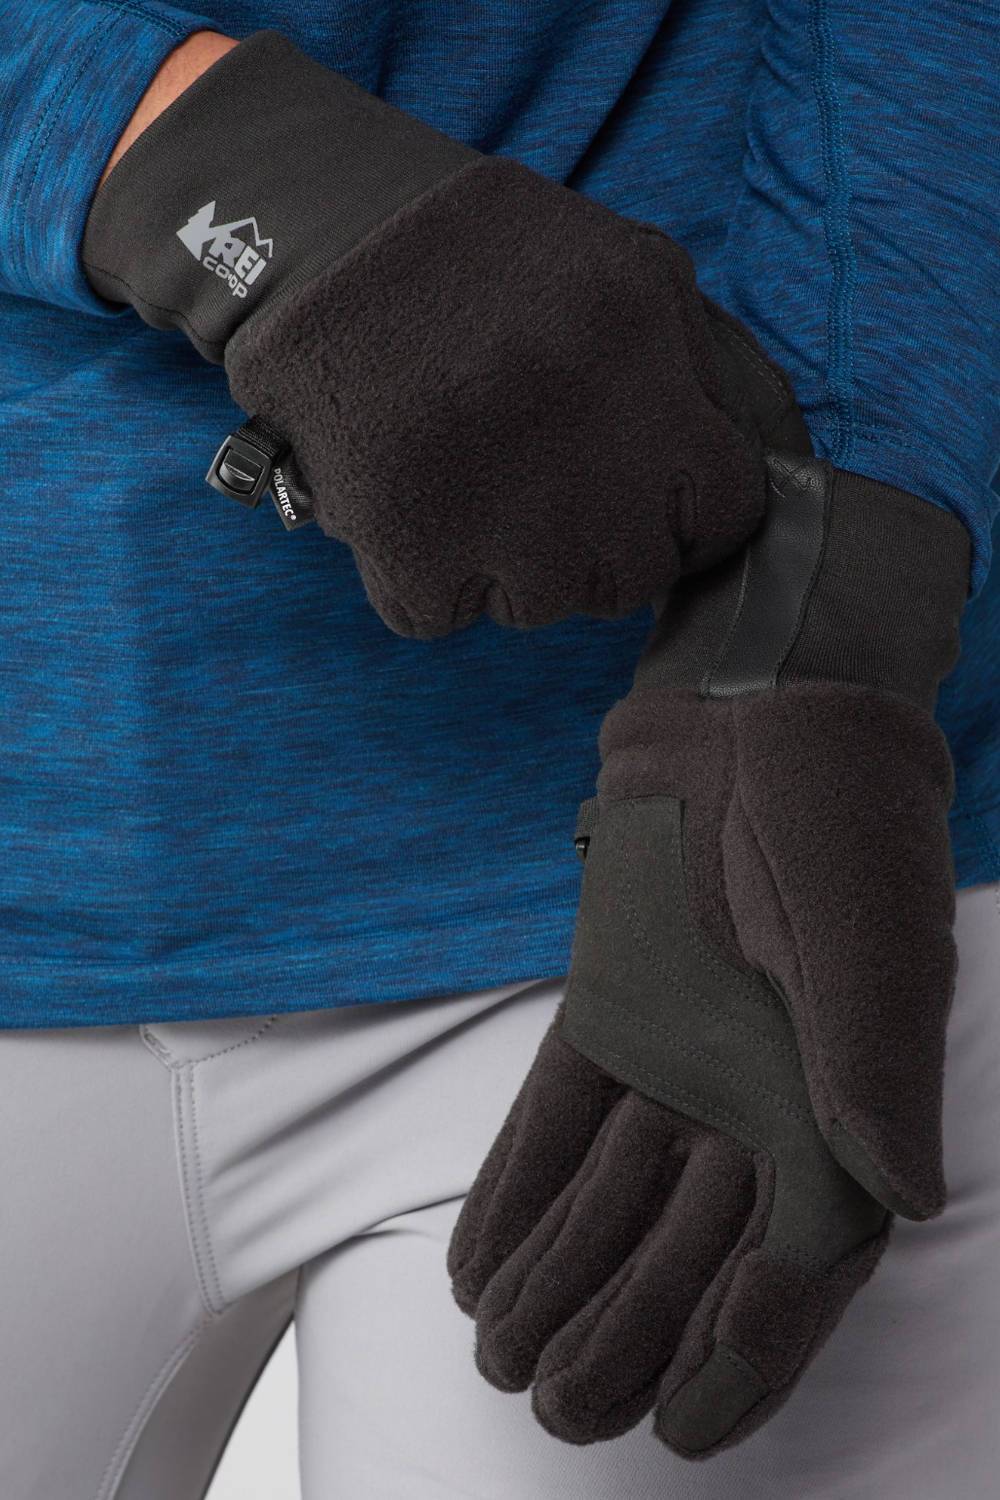 rei recycled gloves